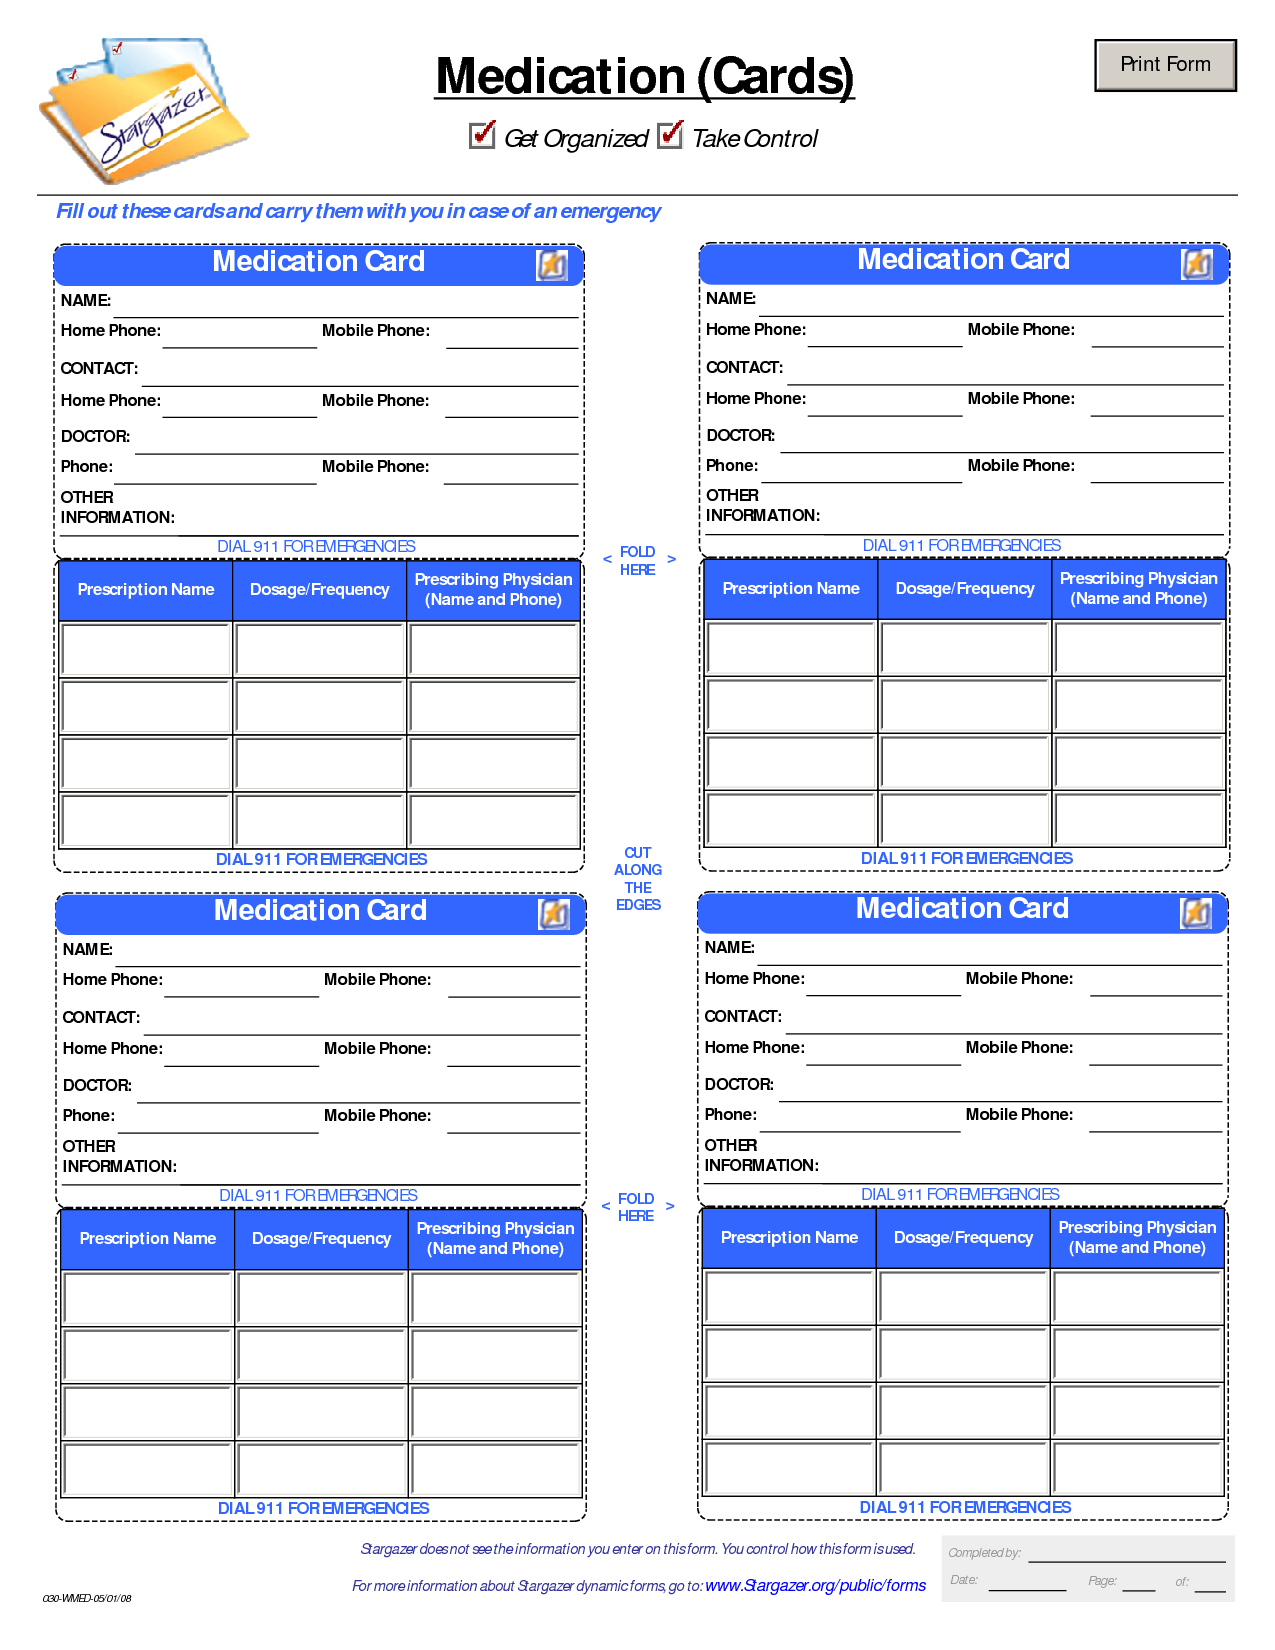 Patient Medication Card Template | Medication List, Medical With Regard To In Case Of Emergency Card Template